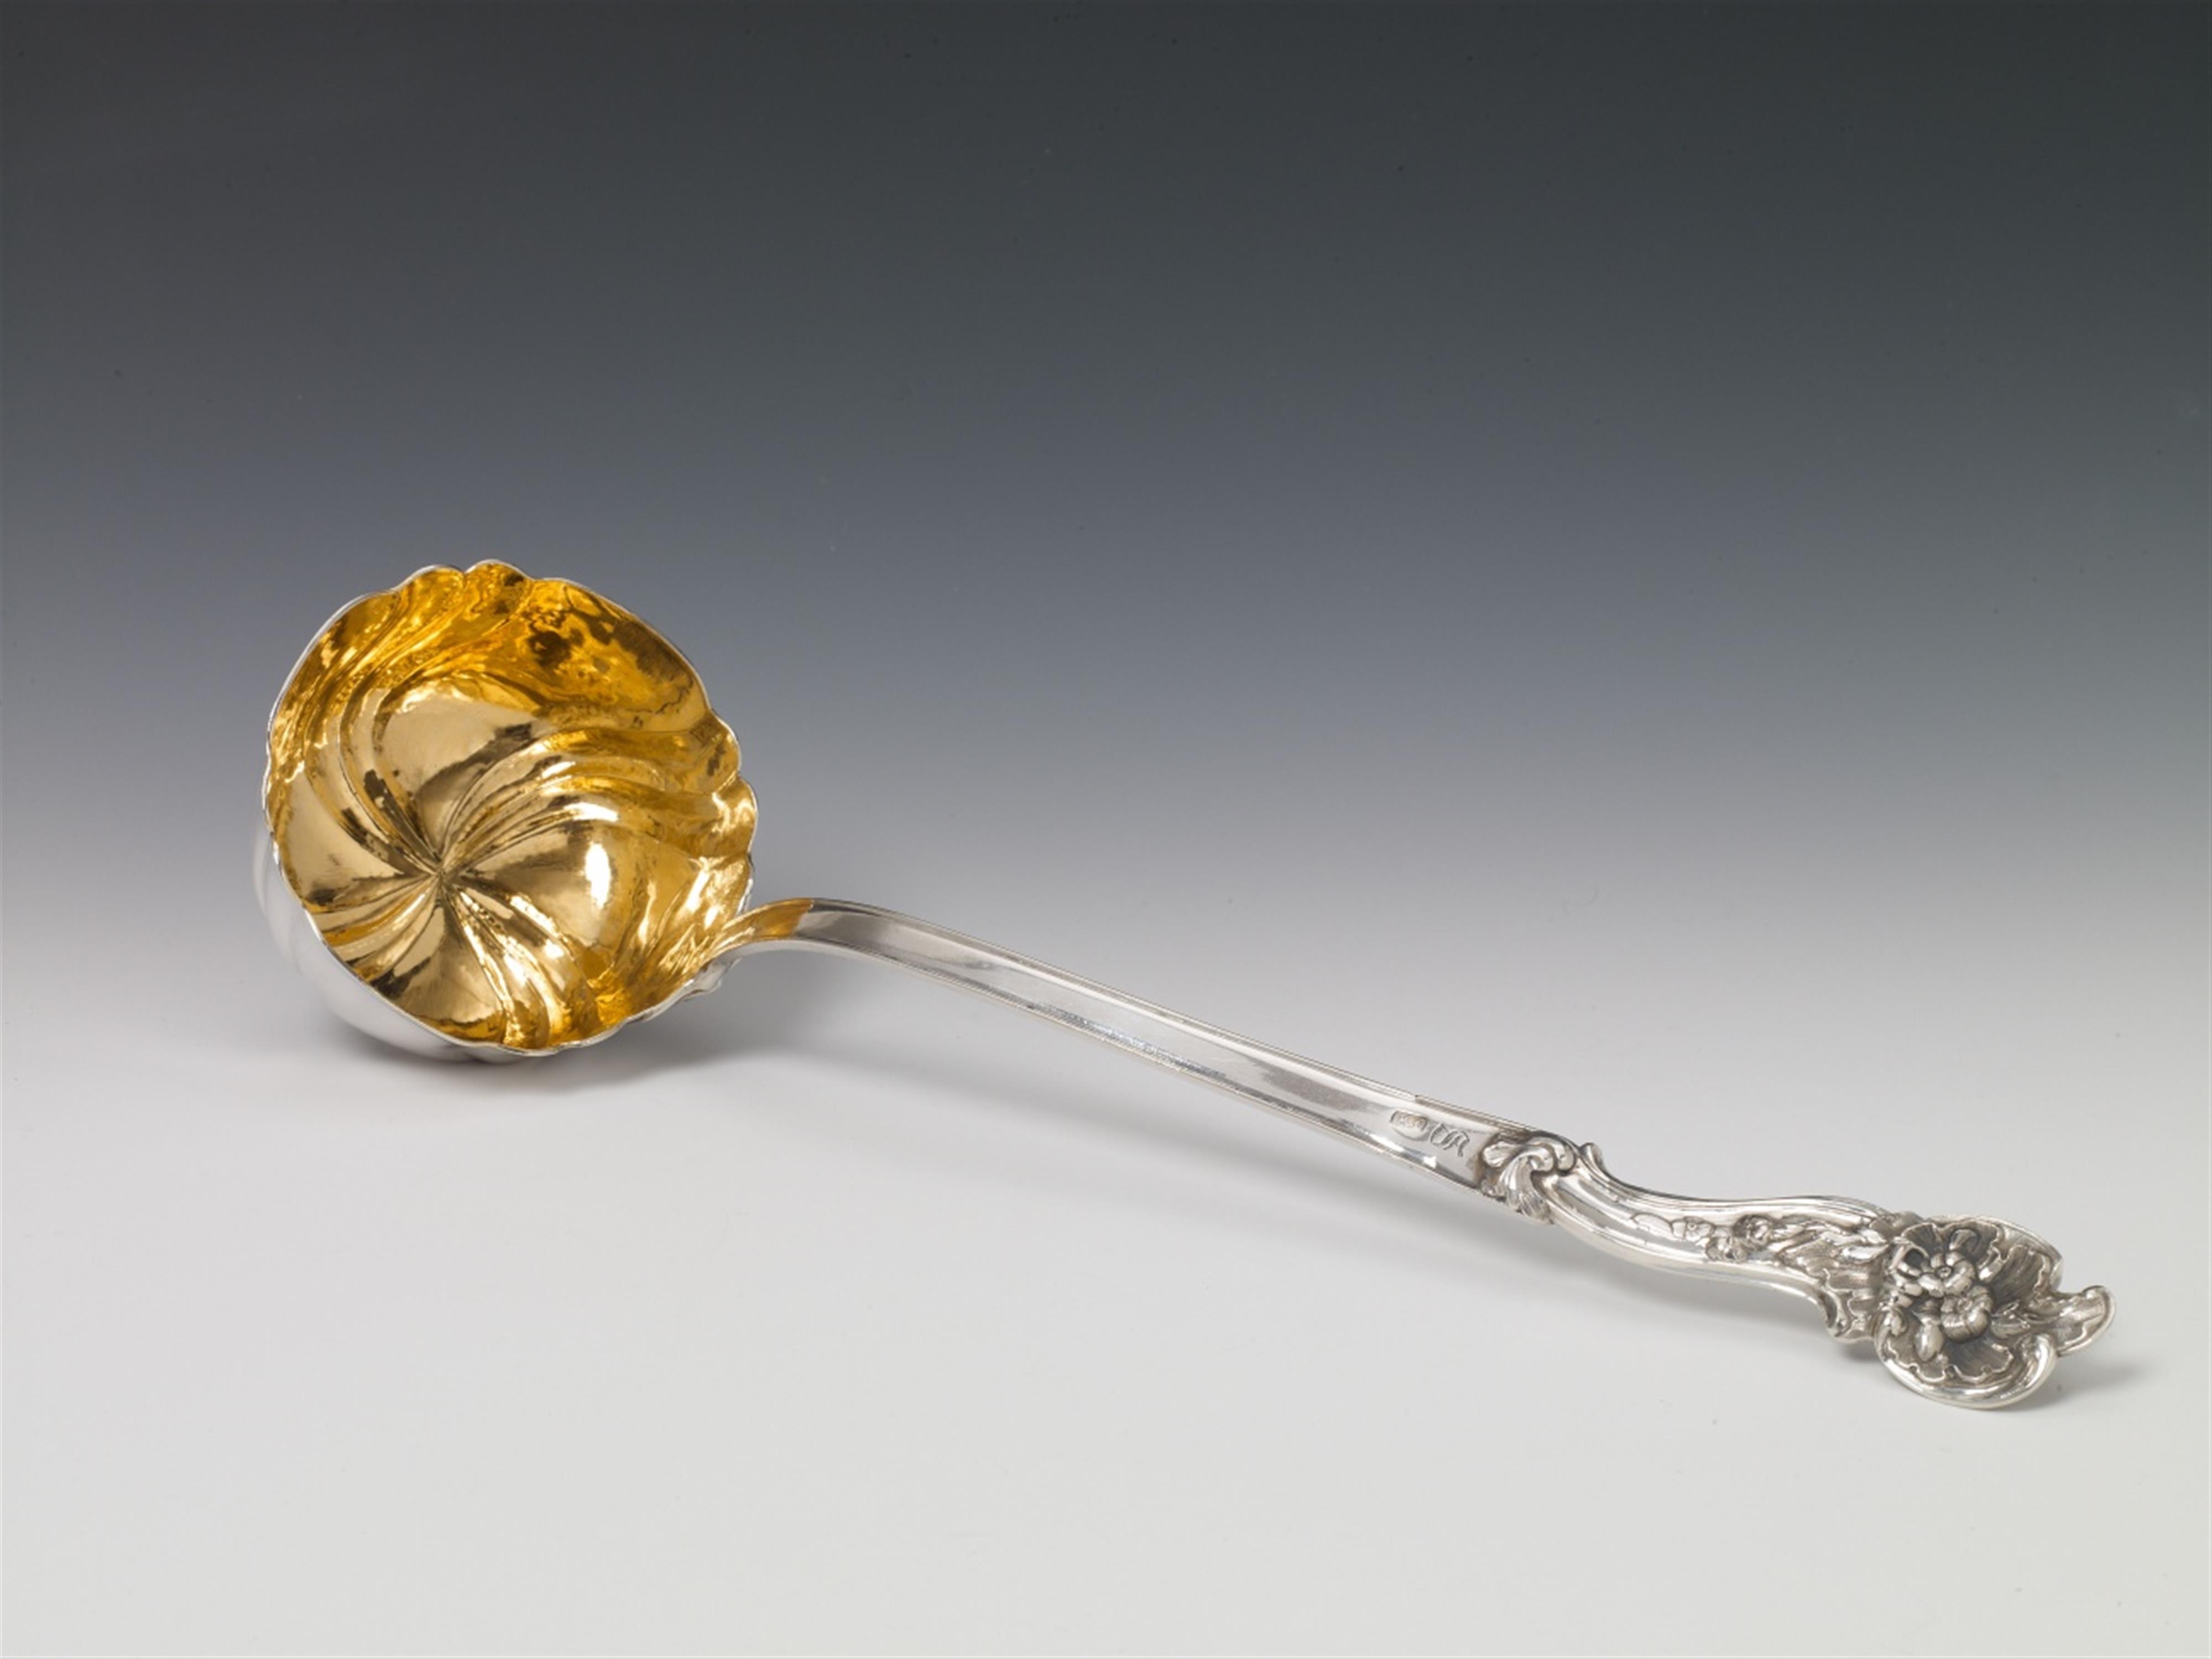 A Berlin silver interior gilt ladle. Monogrammed "S" to the centre. Probably marks of Friedrich Wilhelm Krause, ca. 1764 - 70. The handle with restoration. - image-1